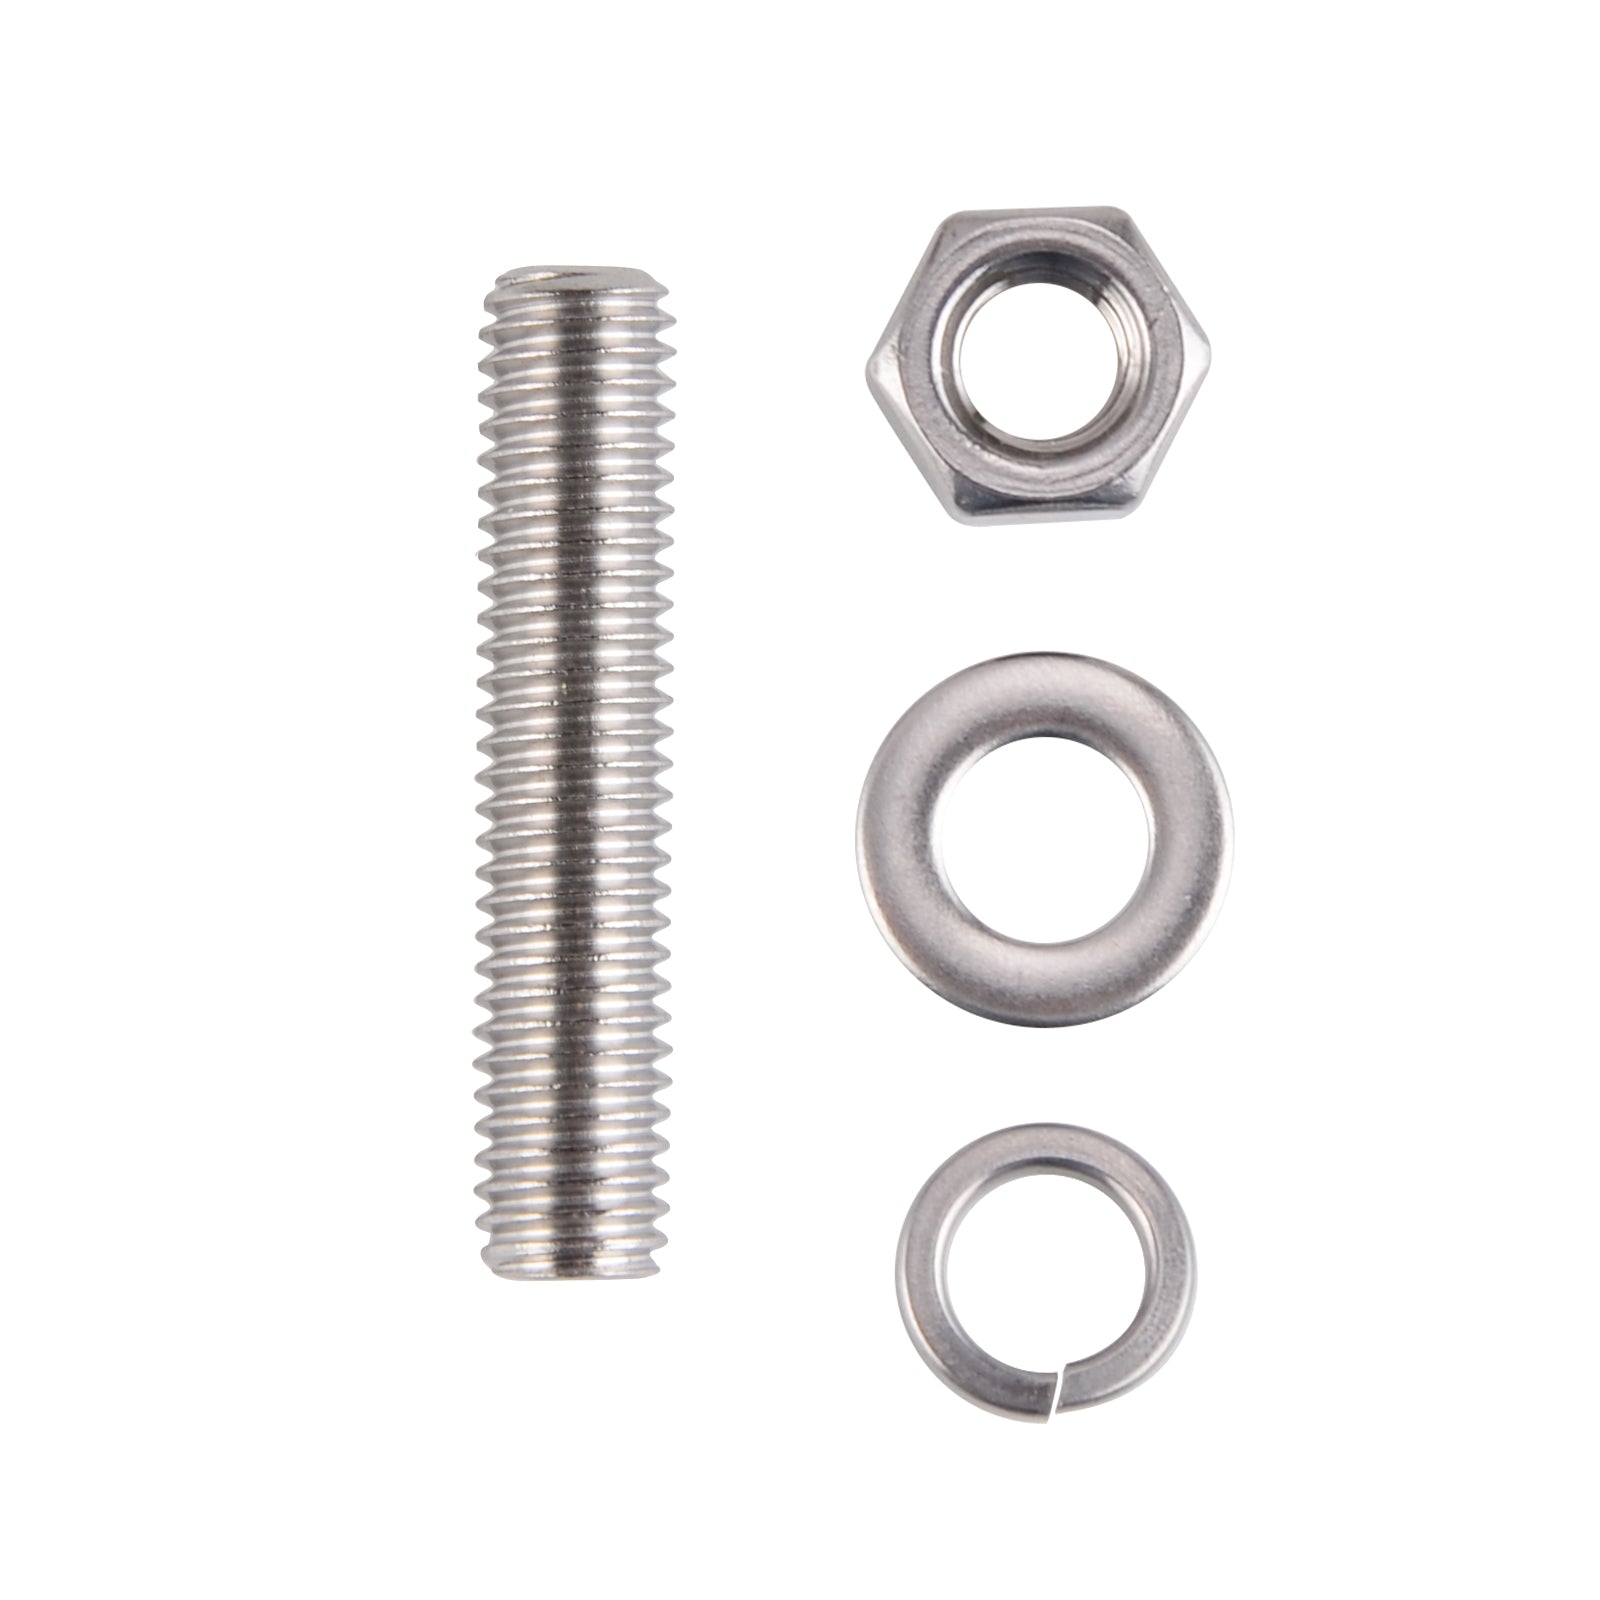 1 Set M8X40MM Stainless Inlet Stainless Steel Manifold Studs Nuts Washers